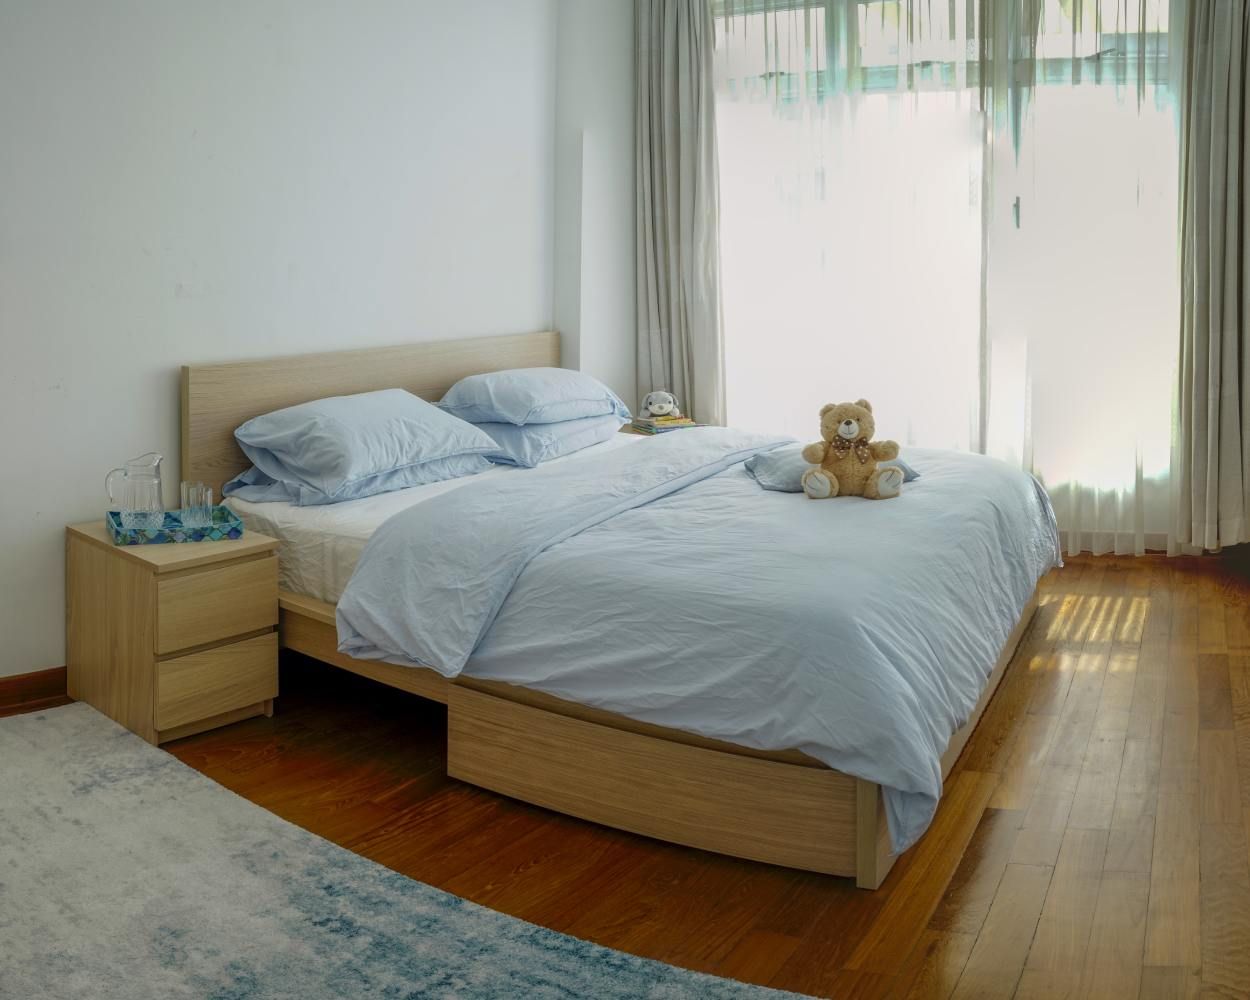 Contemporary Master Bedrom Design With Wooden Flooring